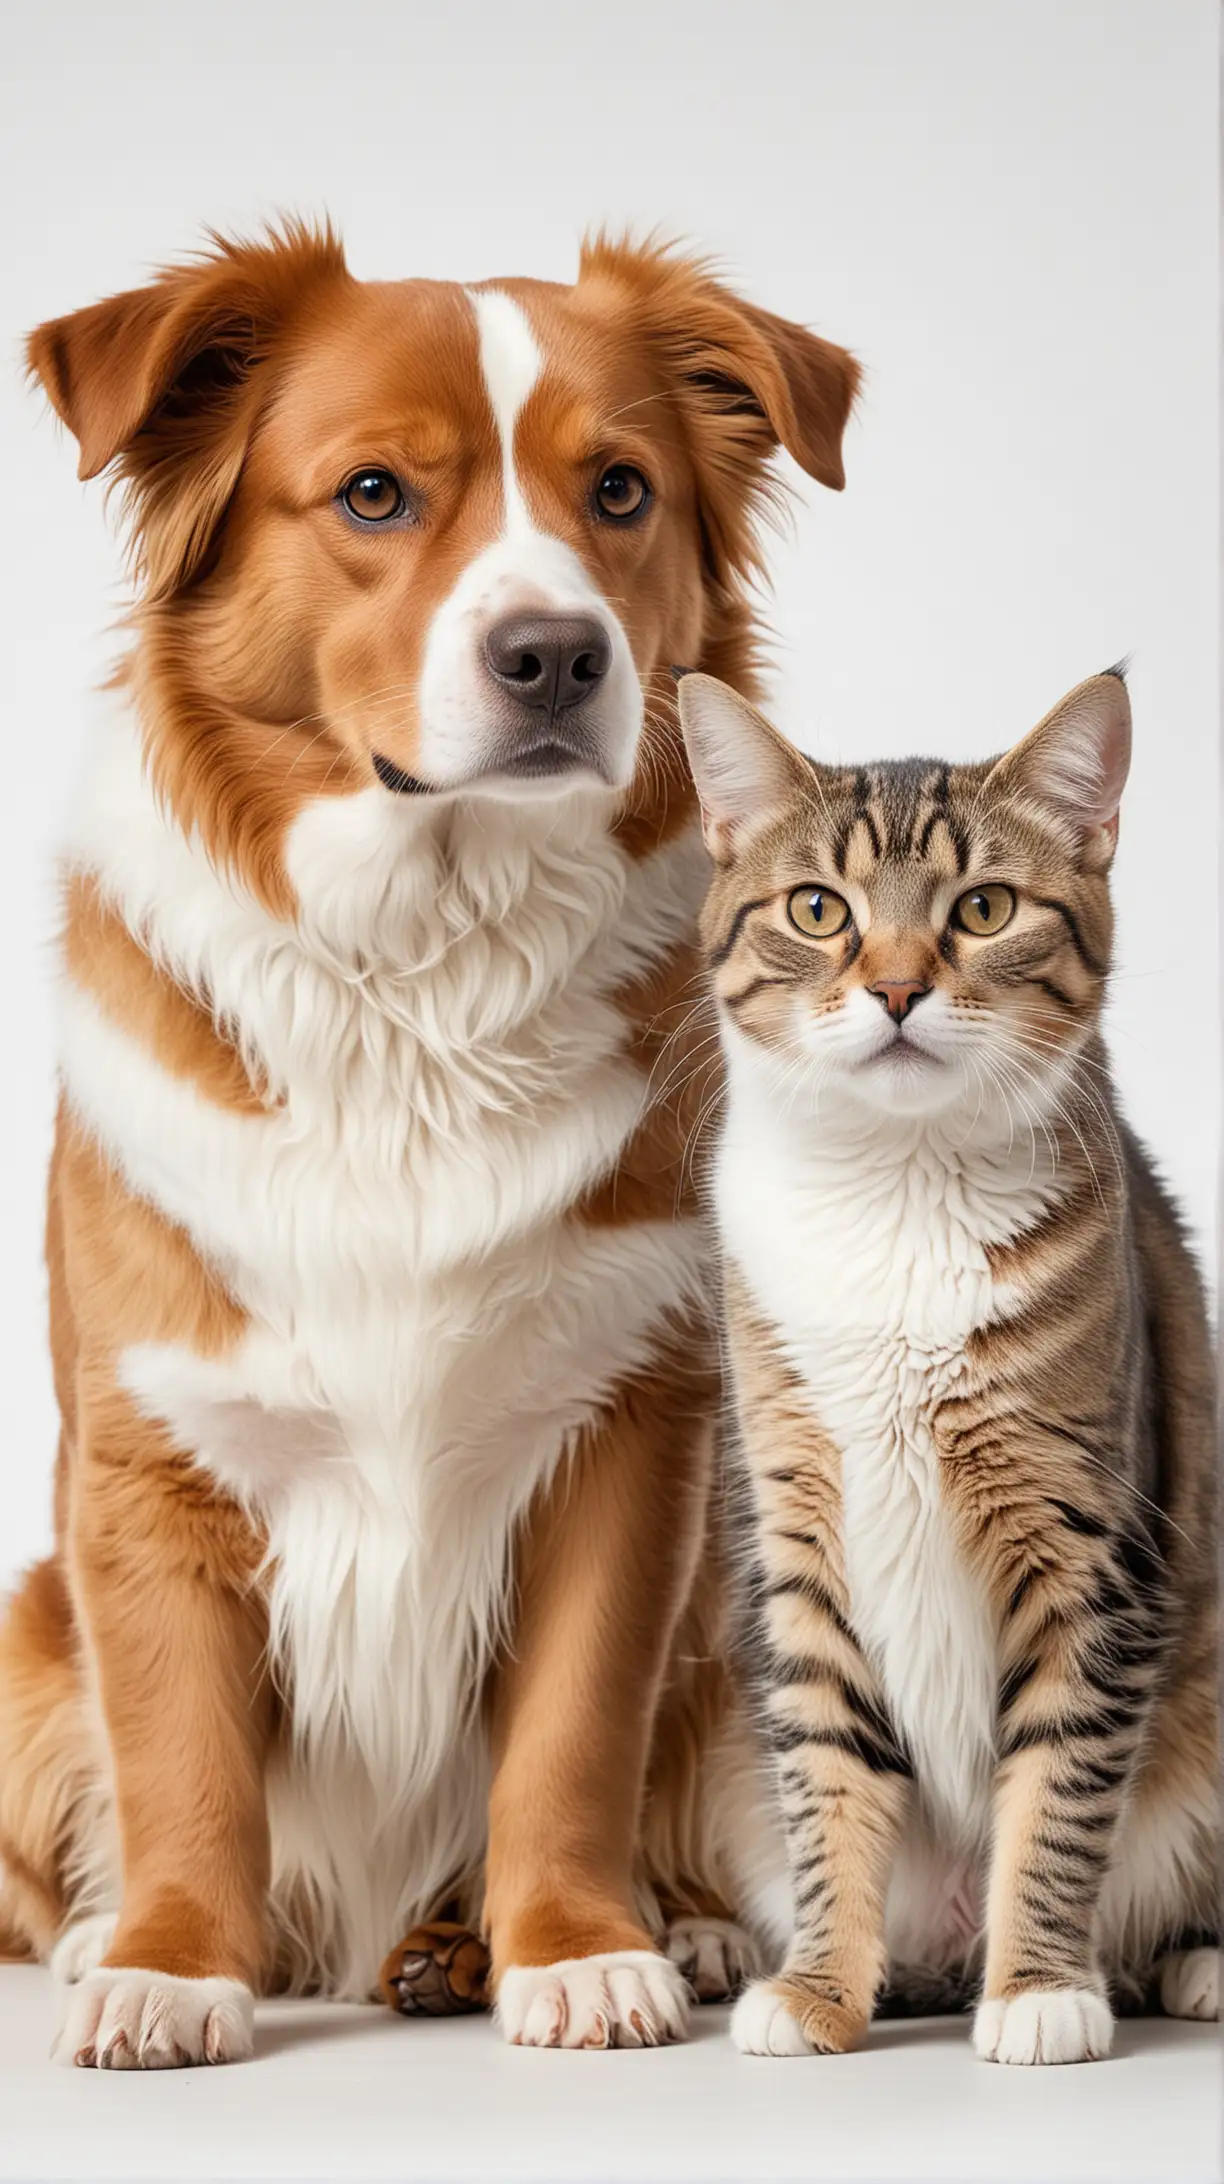 Playful Dog and Cat on White Background